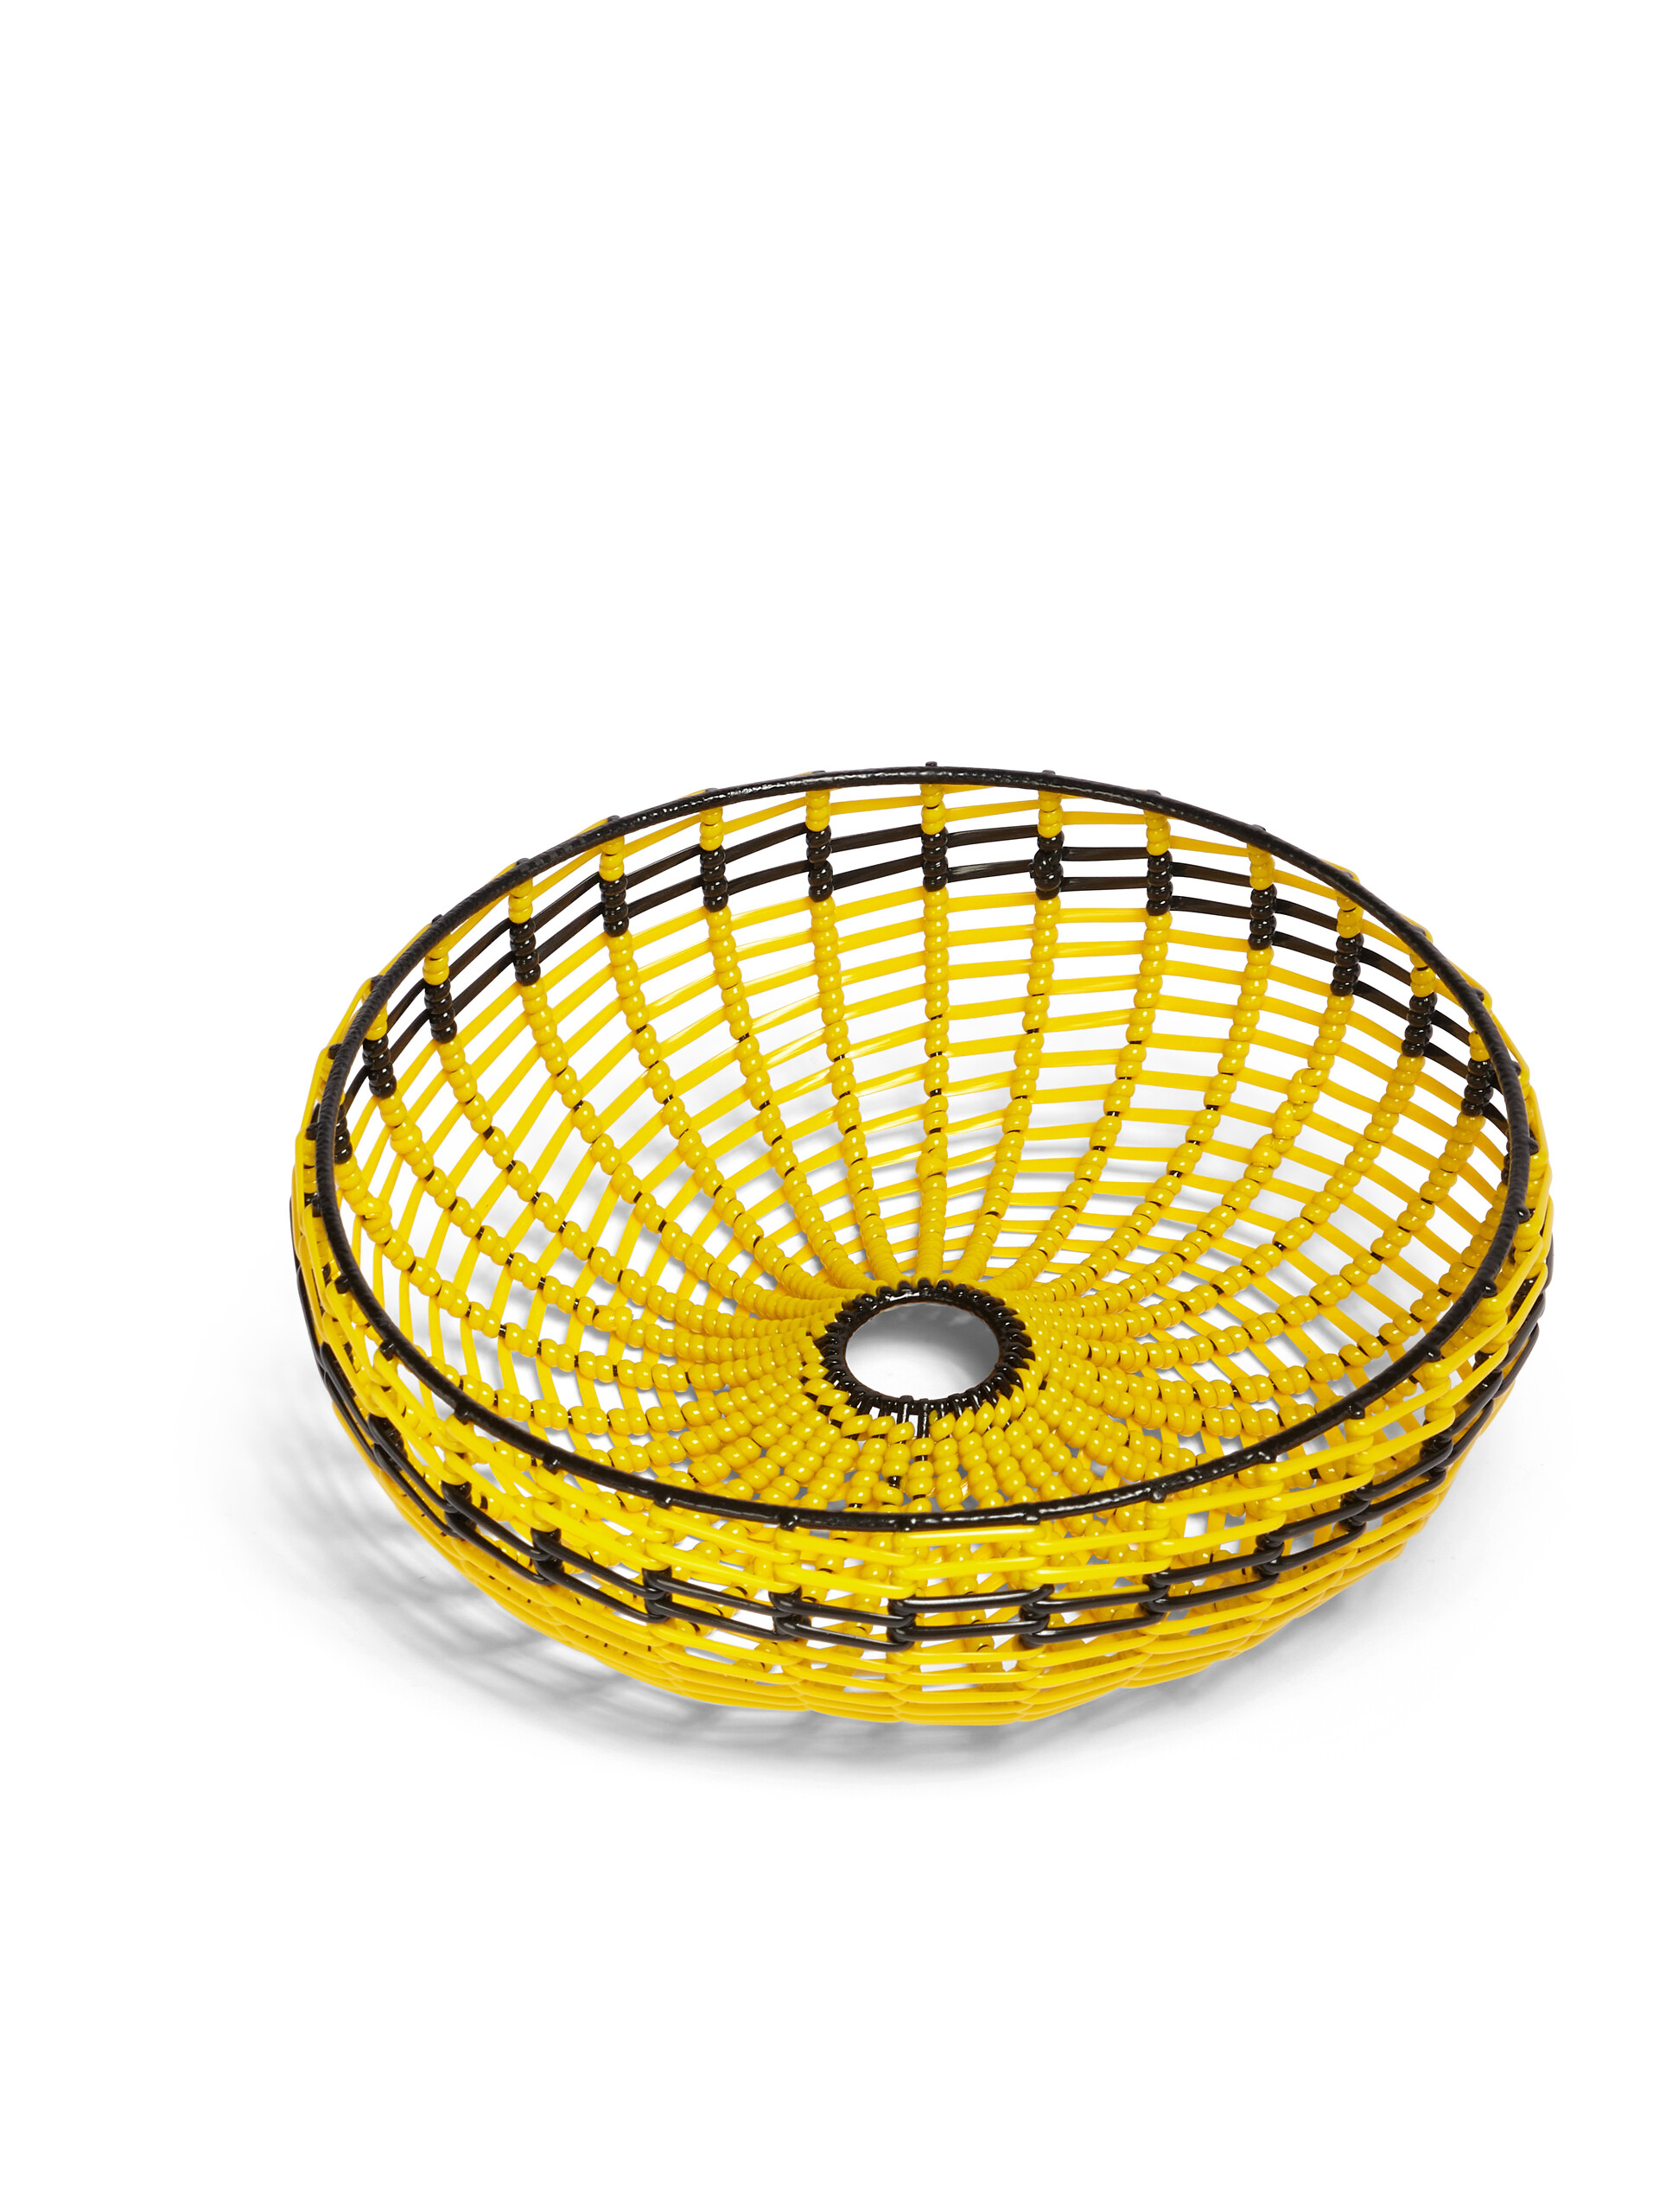 MARNI MARKET yellow and black small basket - Accessories - Image 2